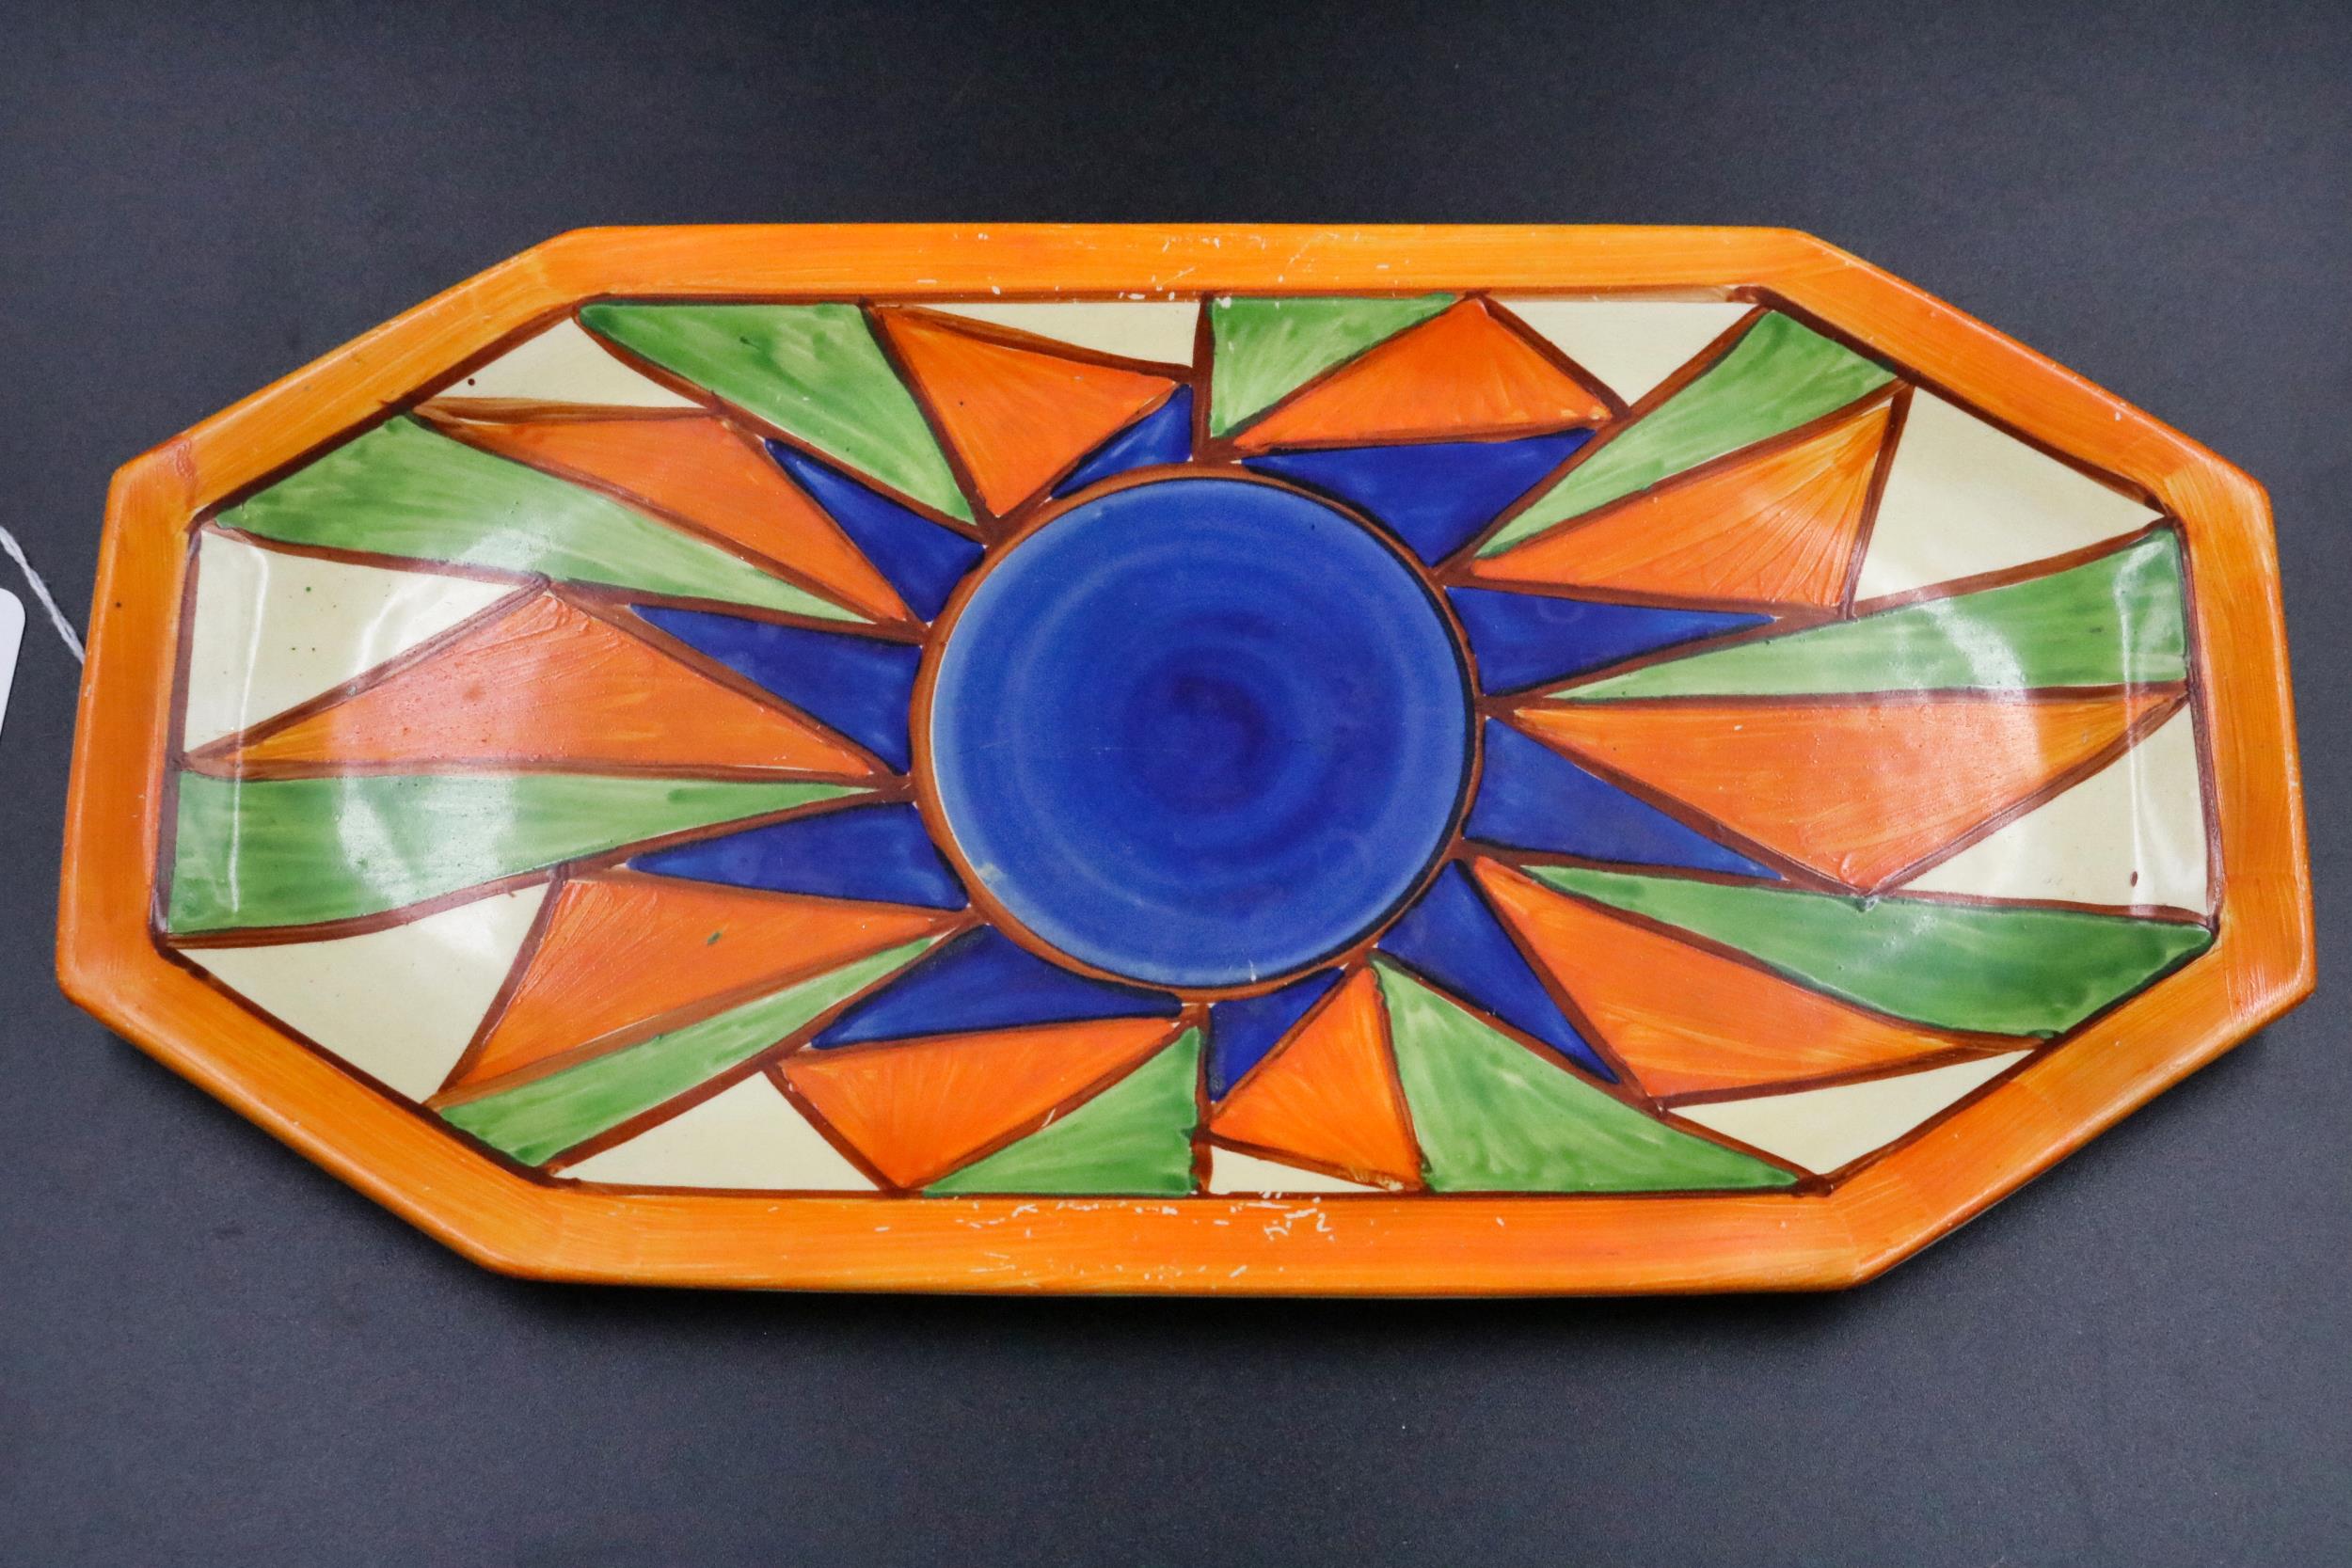 Clarice Cliff, Bizarre pattern sandwich plate - Newport pottery 11.52 x 6" some paint flaking - Image 2 of 8